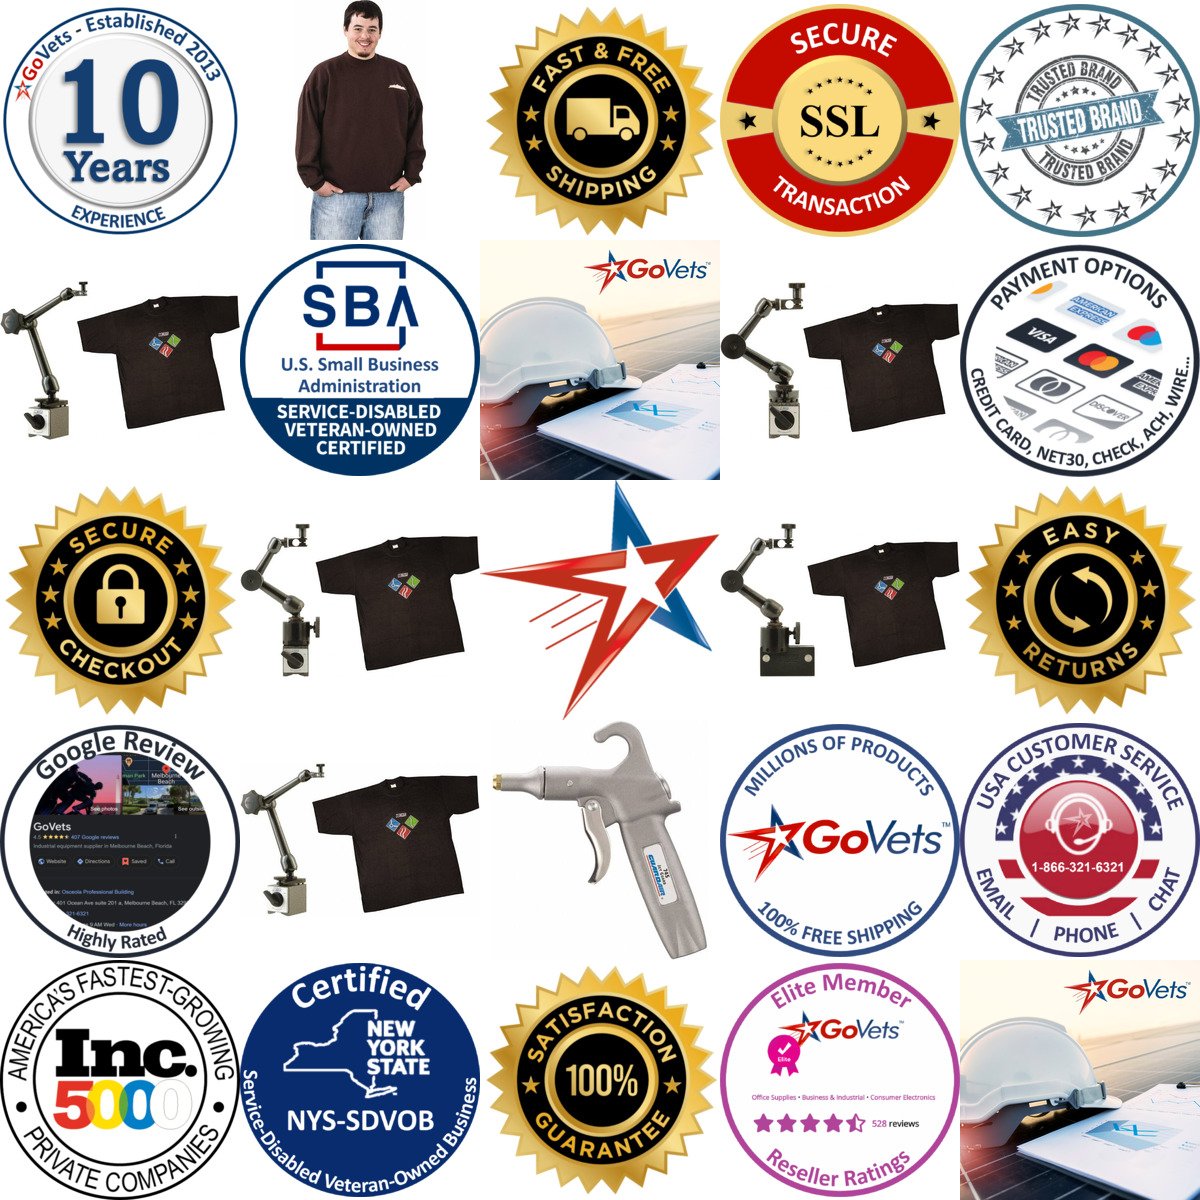 A selection of Promotional Items products on GoVets